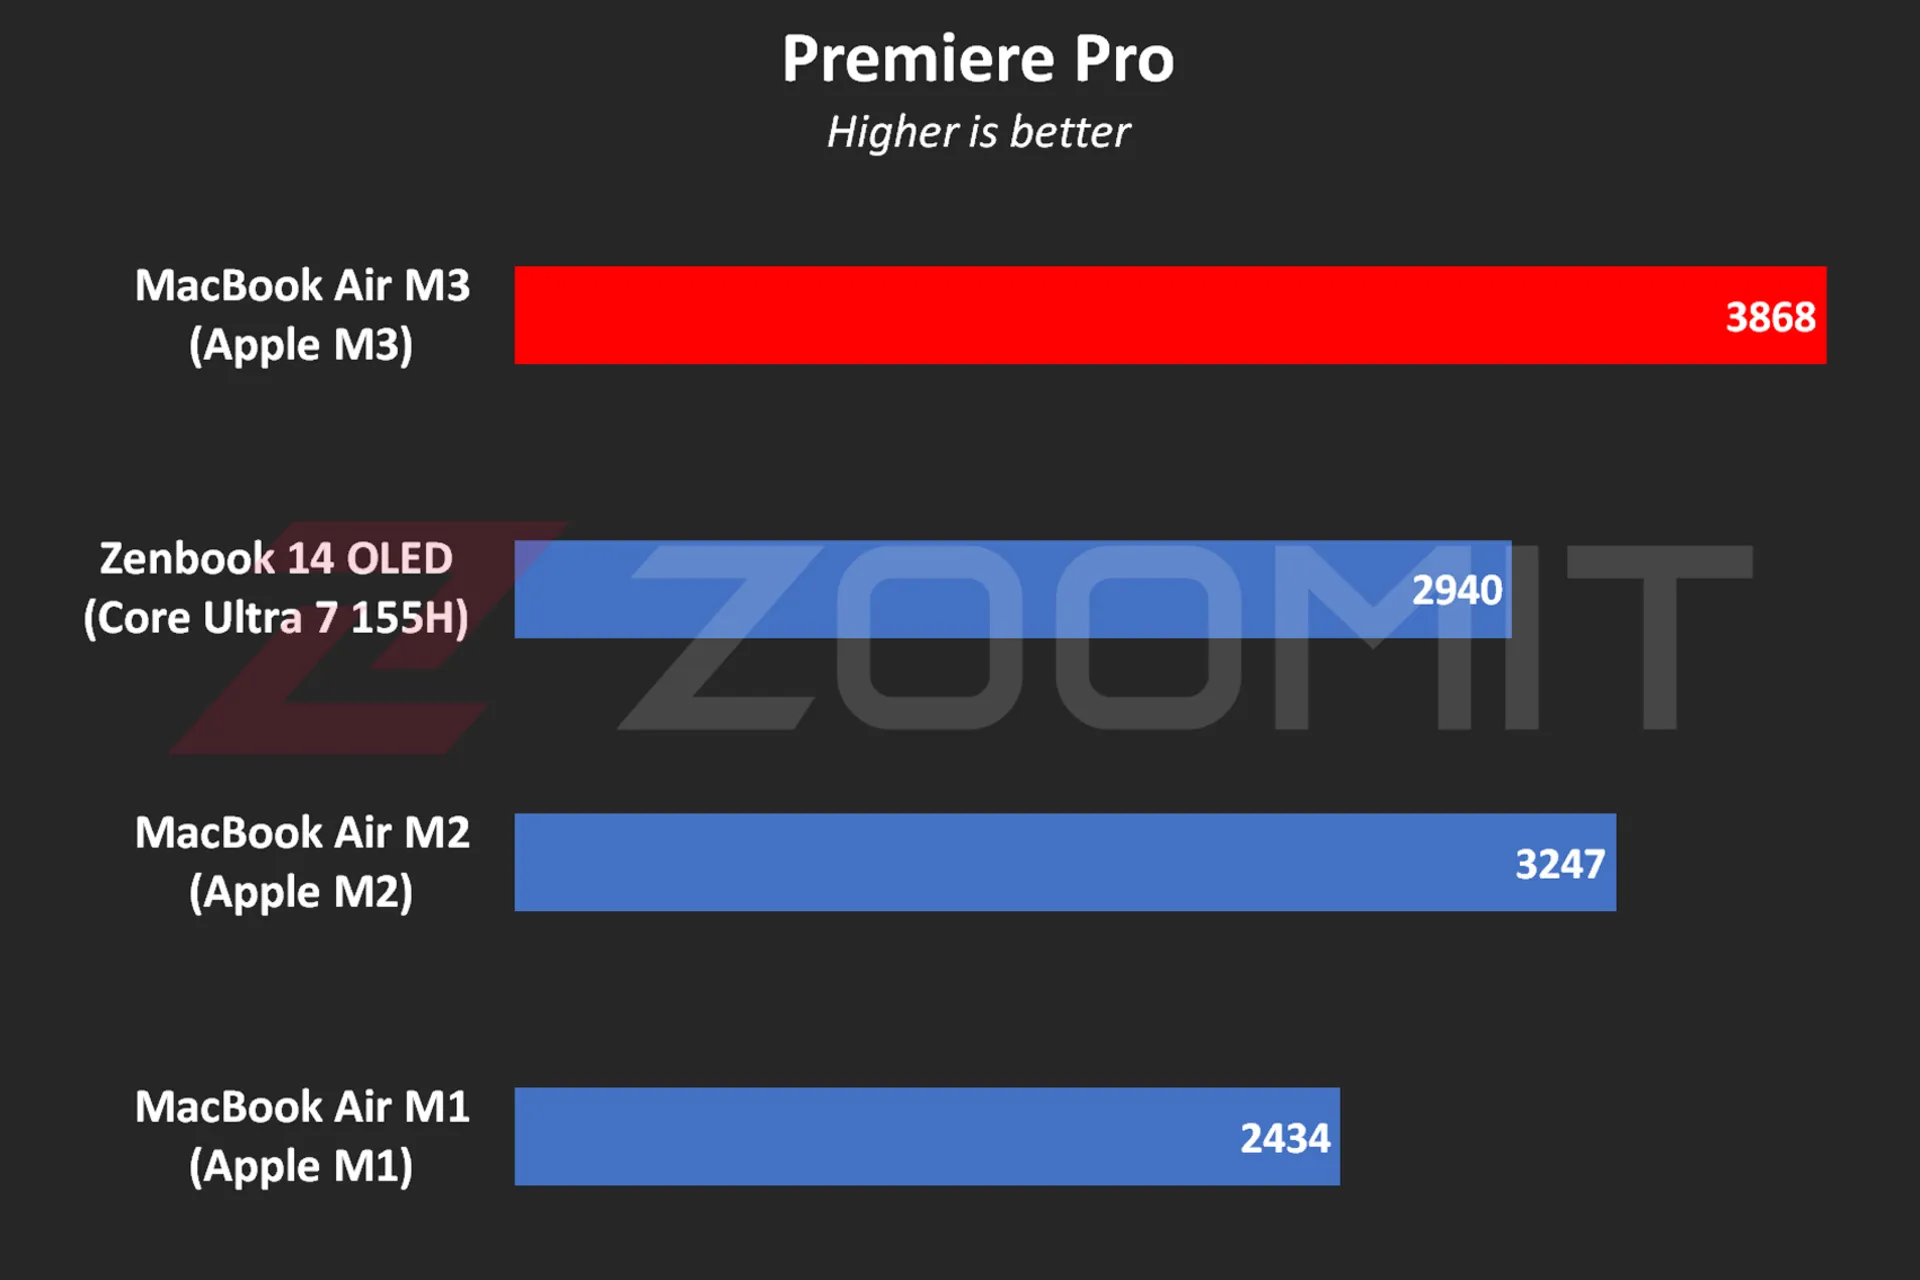 Performance of MacBook Air M3 in running Premier Pro software